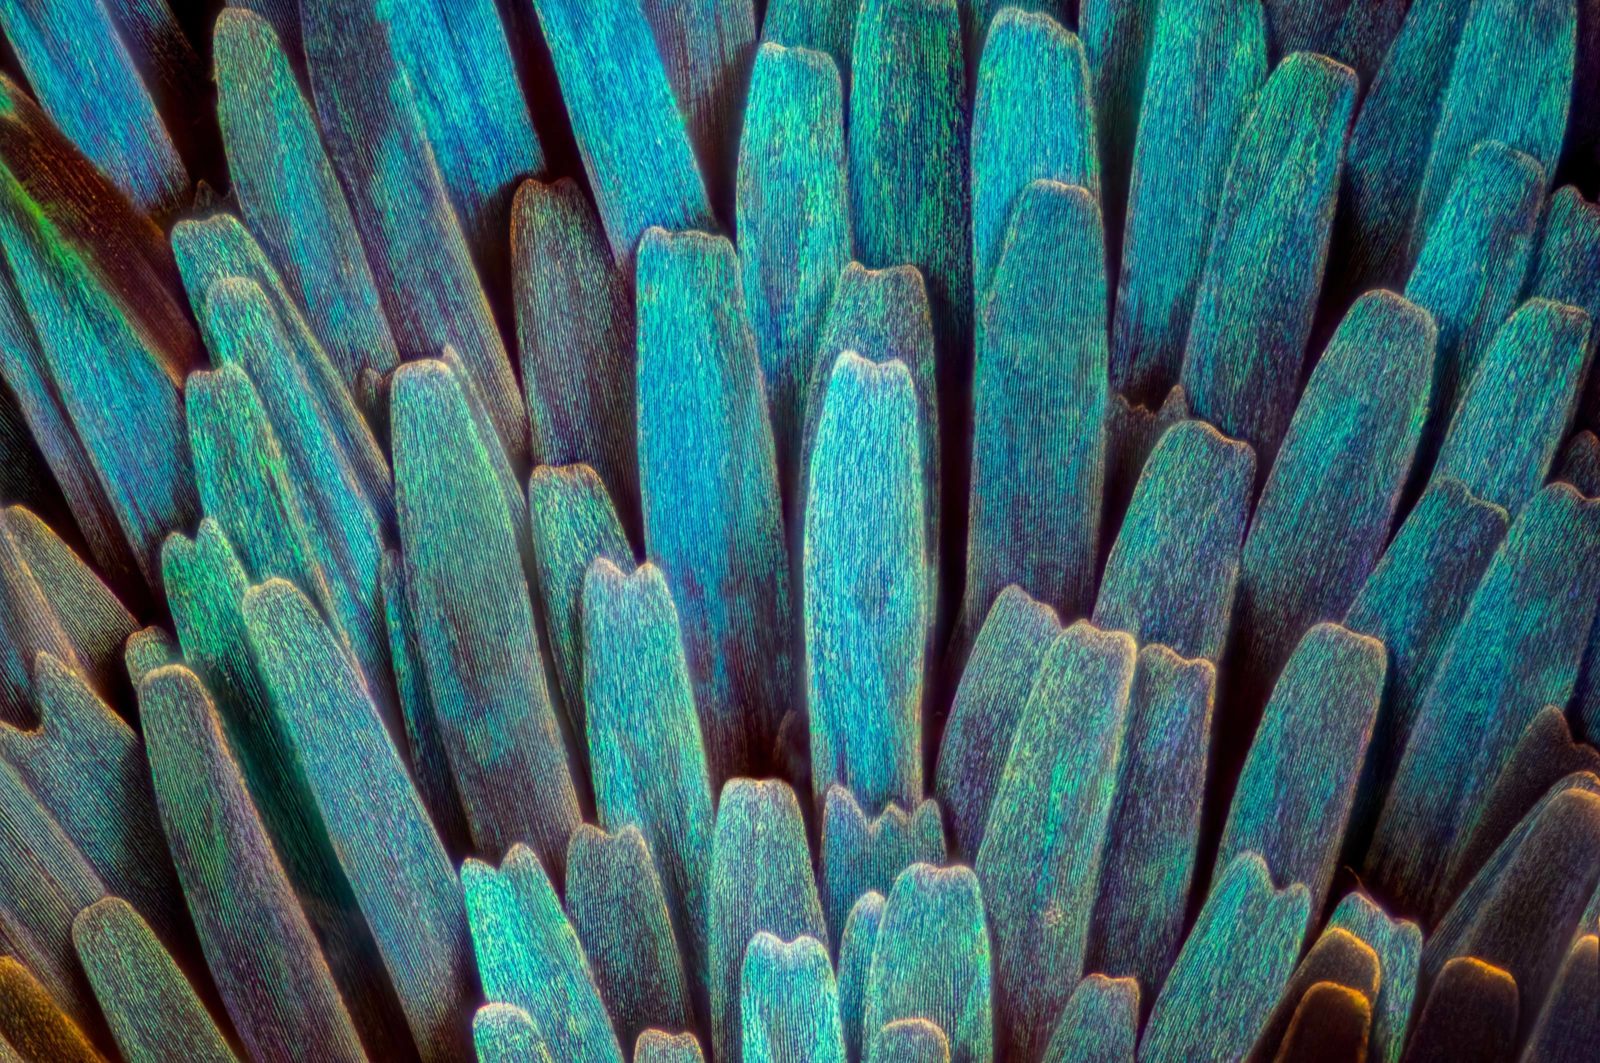 Scales on a moth wing from a microphotography contest 